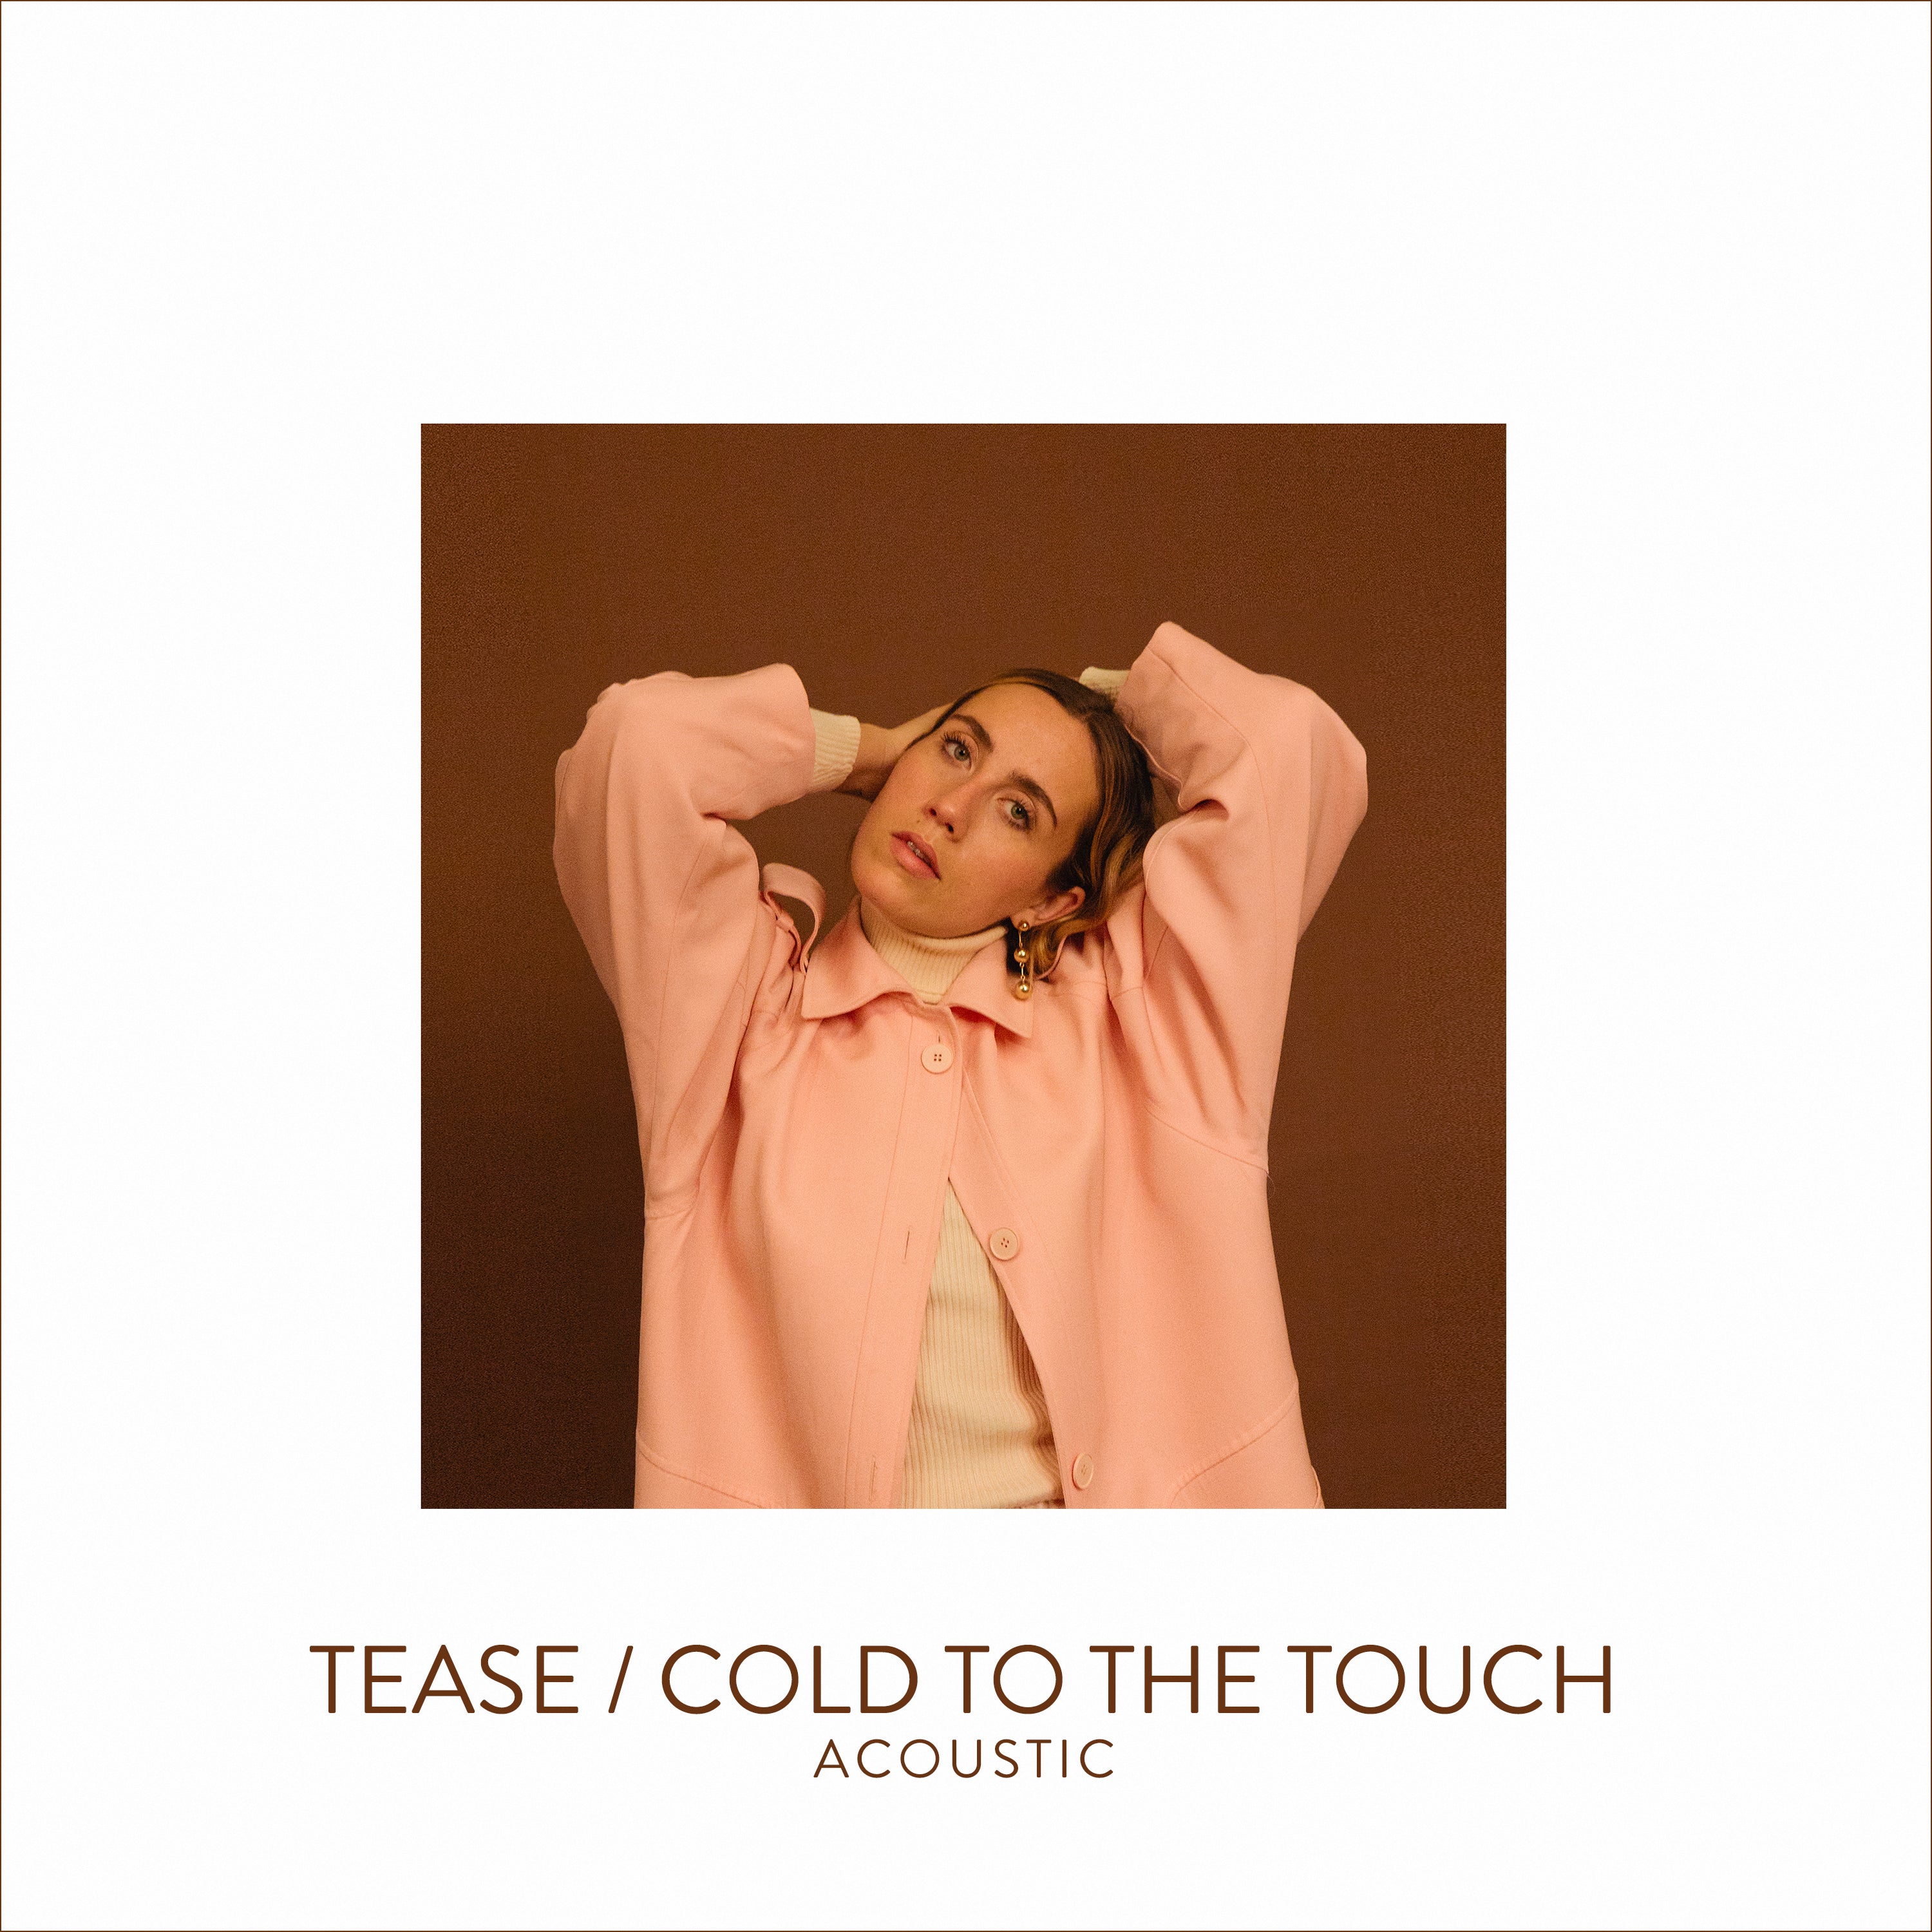 Tease/ Cold To The Touch Acoustic